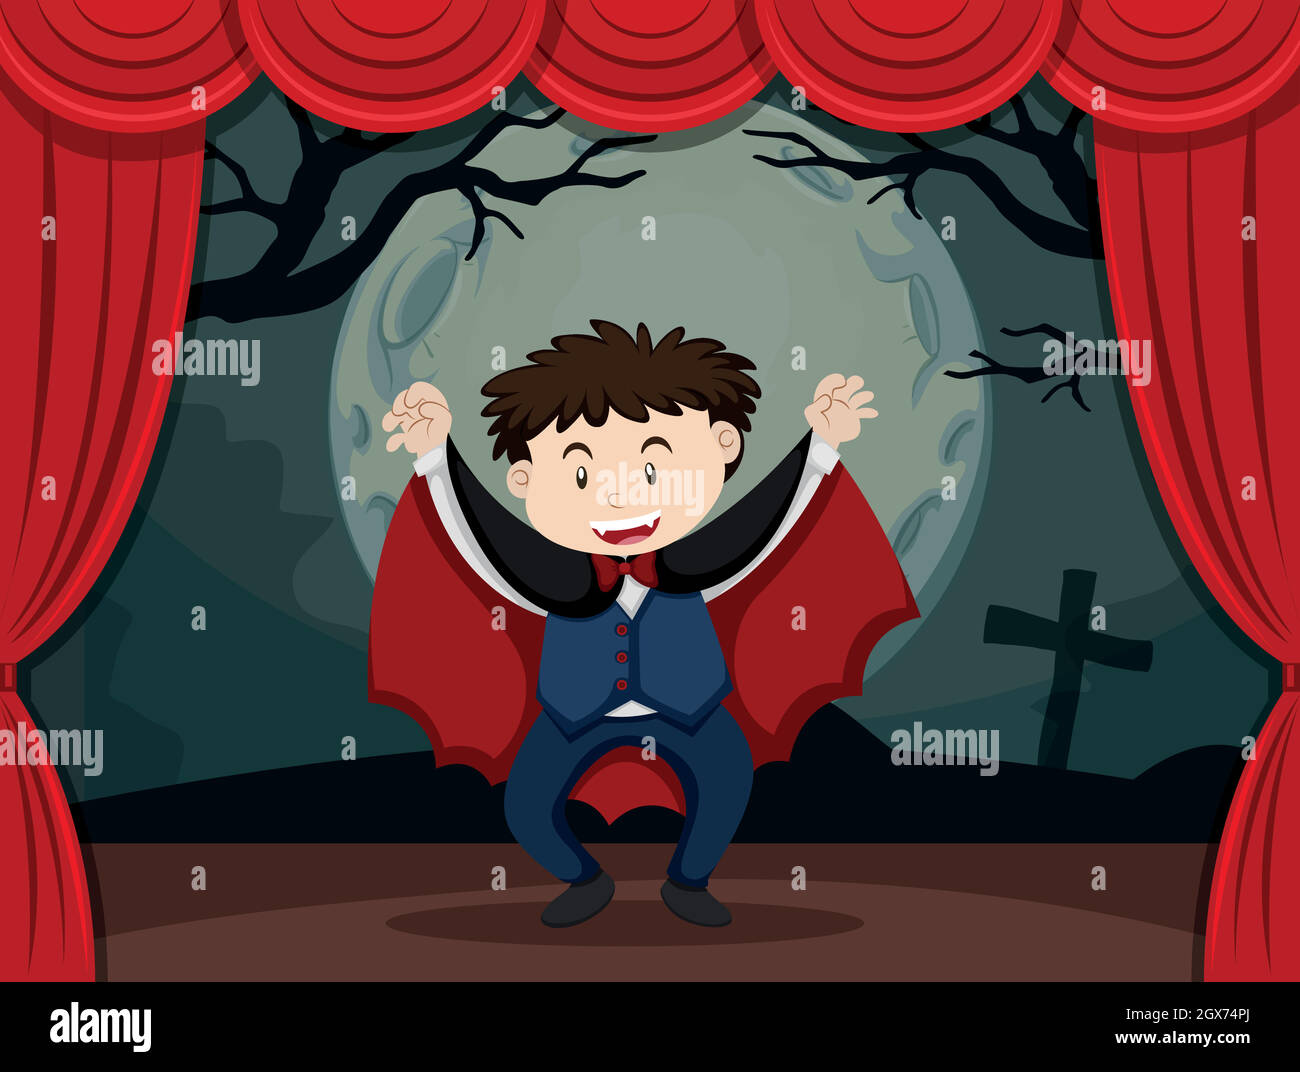 Stage play with boy in vampire costume Stock Vector